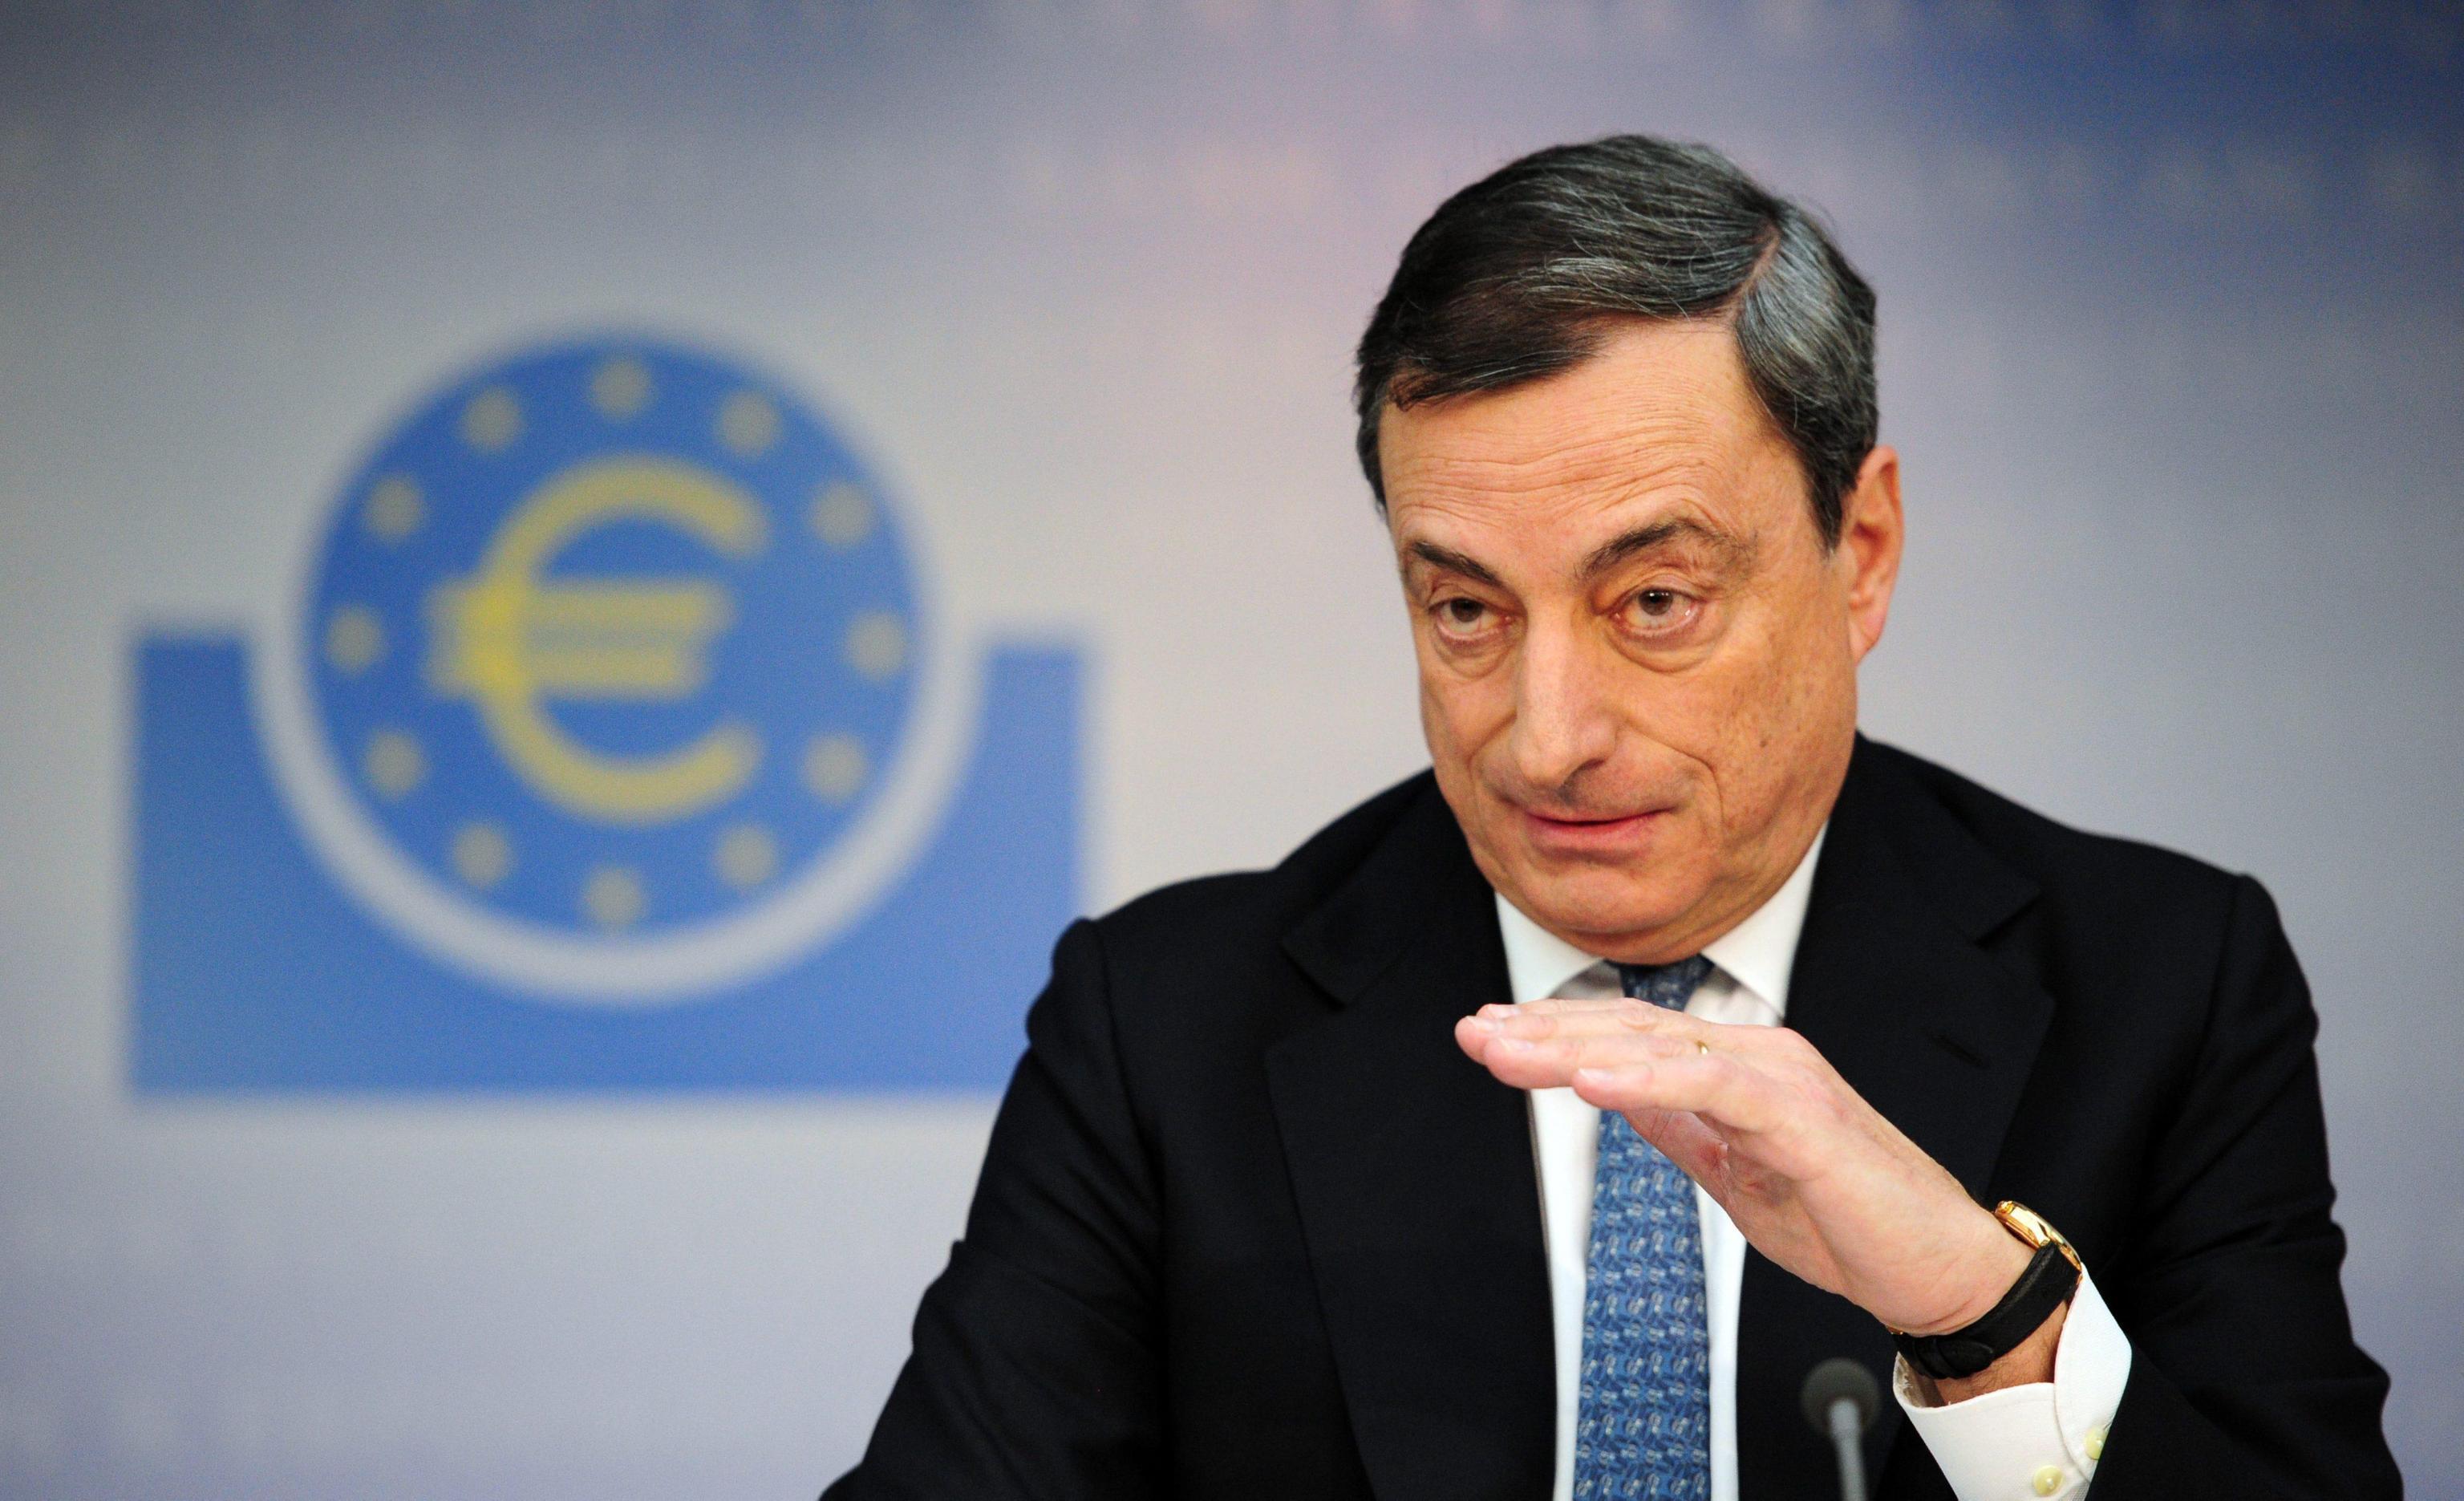 The president of the European Central Bank (ECB) Mario Draghi speaks during the press conference in Frankfurt am Main, Germany, 07 November 2013. 
The ECB has lowered the base rate in the euro area on to 0,25 per cent.  European Central Bank chief Mario Draghi said the ECB believes the eurozone's economy has been growing at a modest pace for the second half of 2013. ANSA/DANIEL REINHARDT